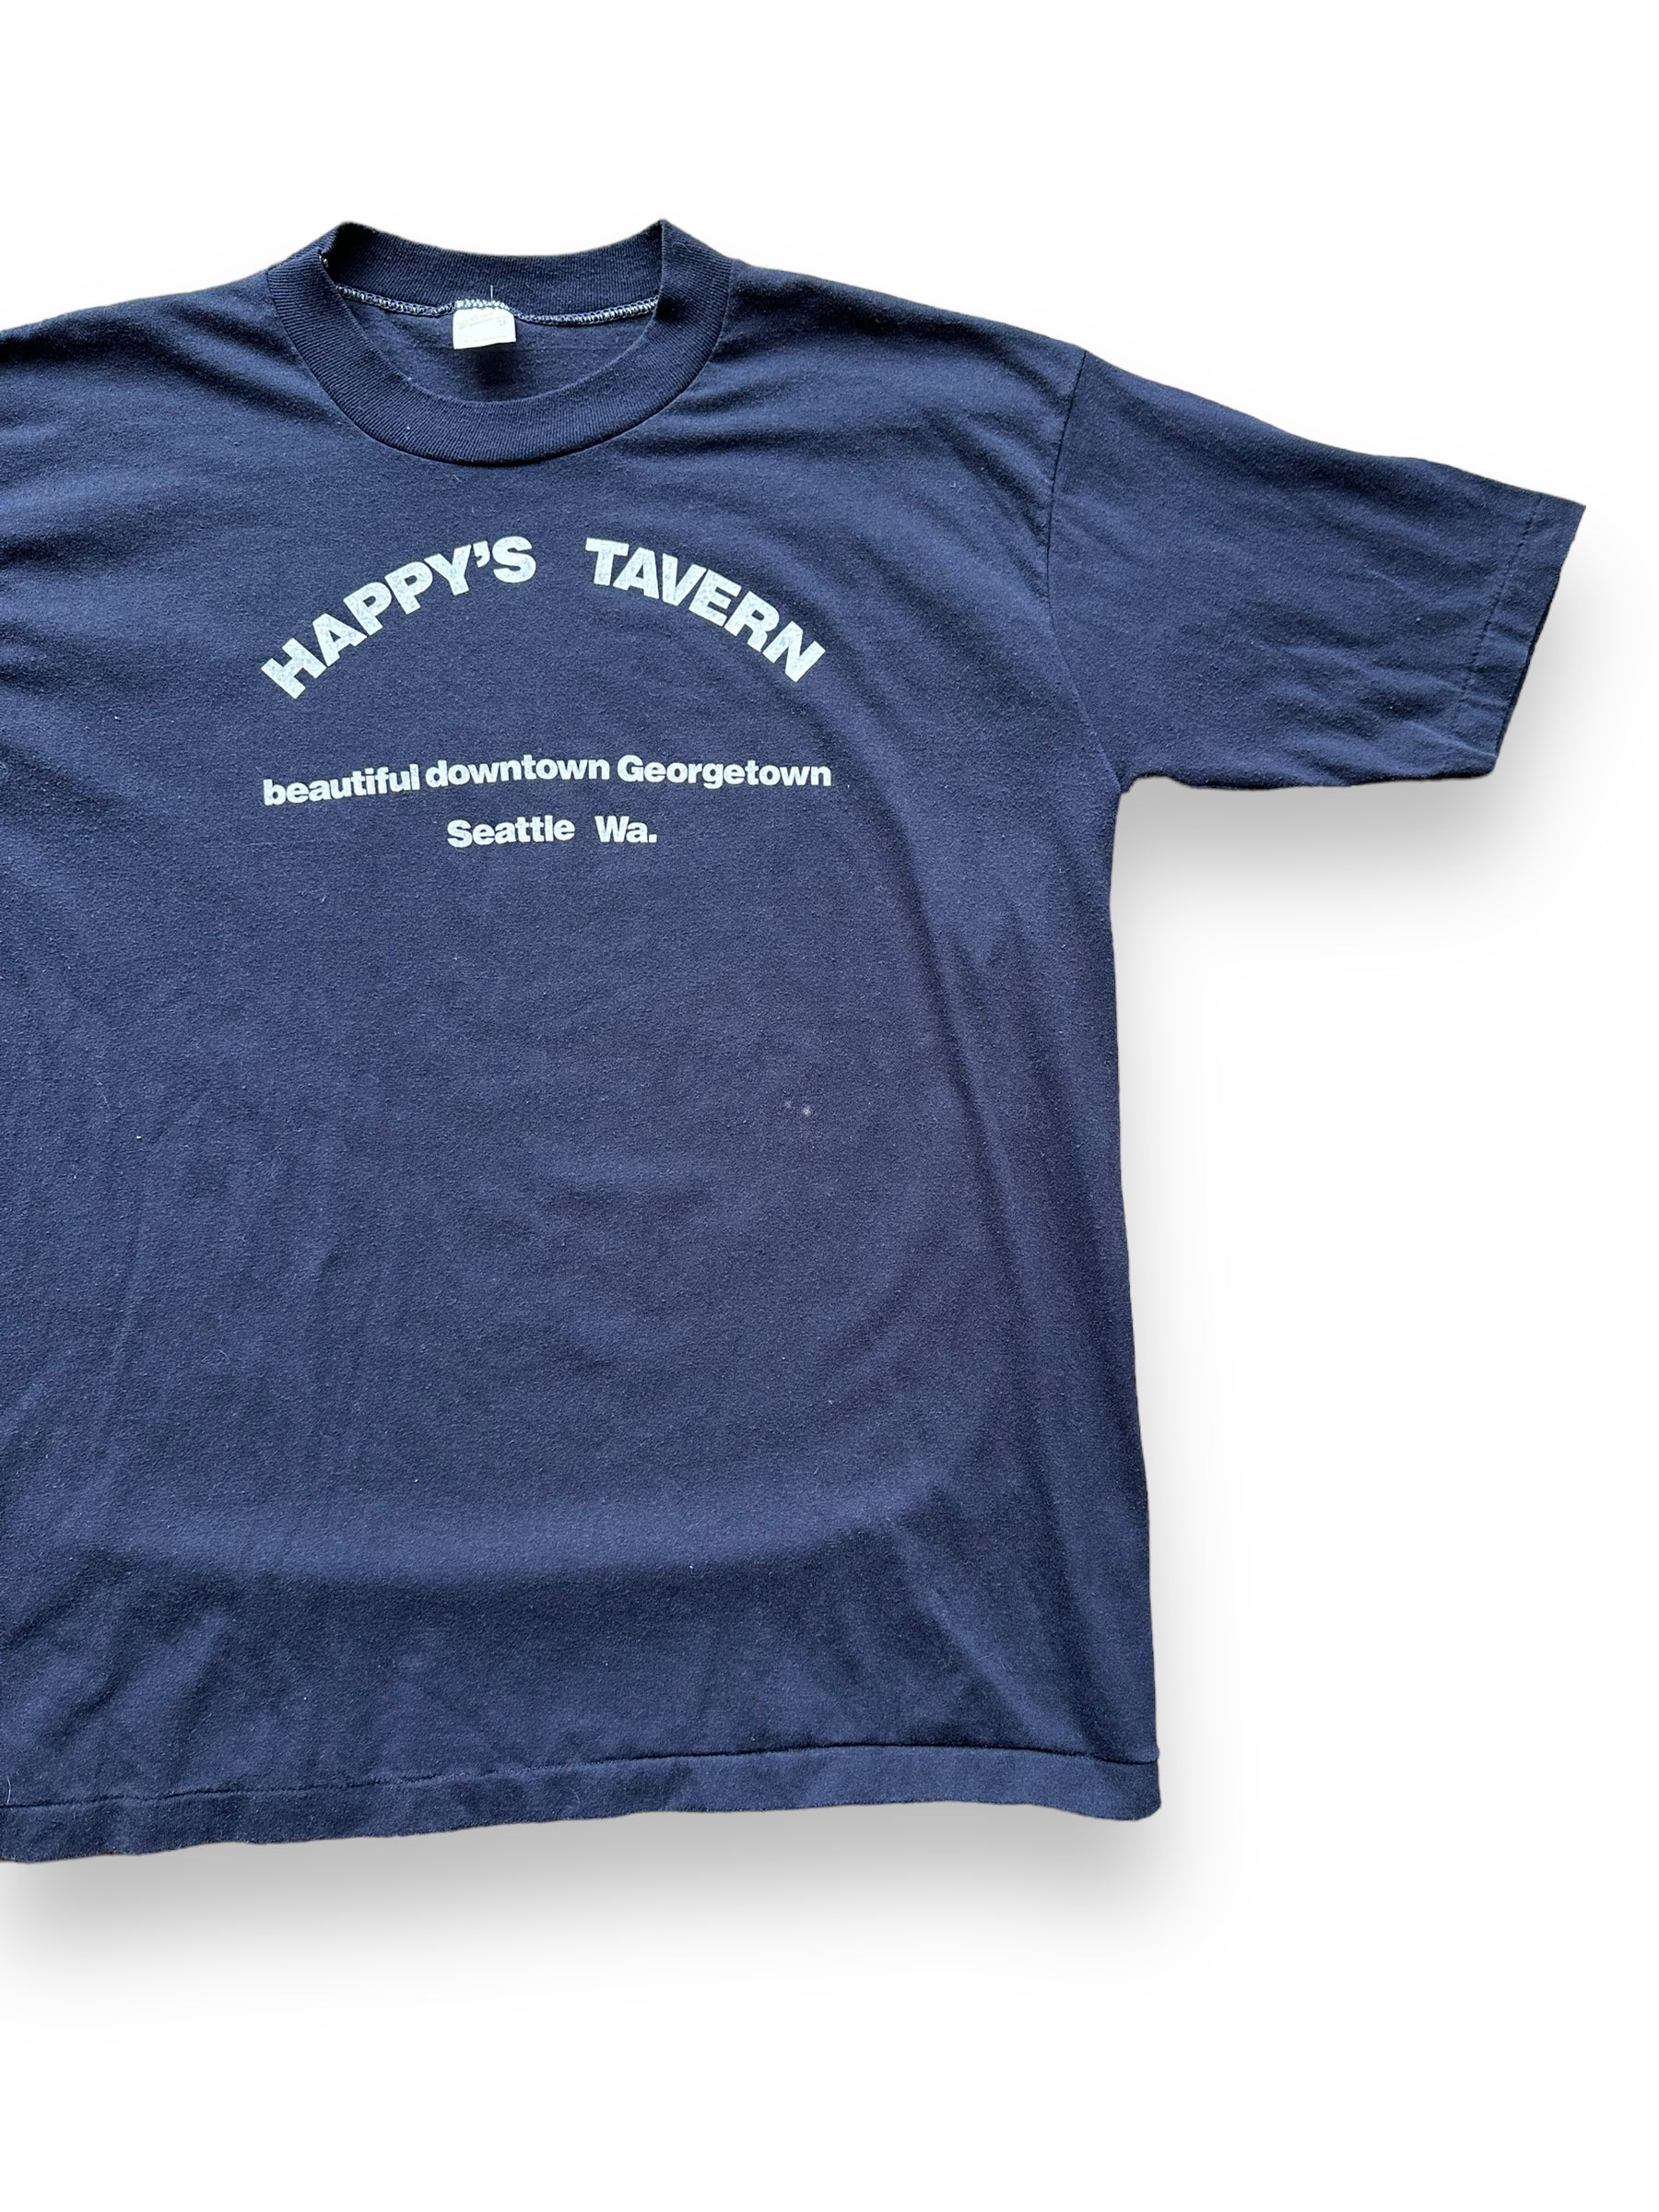 Front Left View of Vintage Happys Tavern Georgetown Tee SZ XL | Vintage Single Stitch T-Shirts Seattle | Barn Owl Vintage Tees Seattle